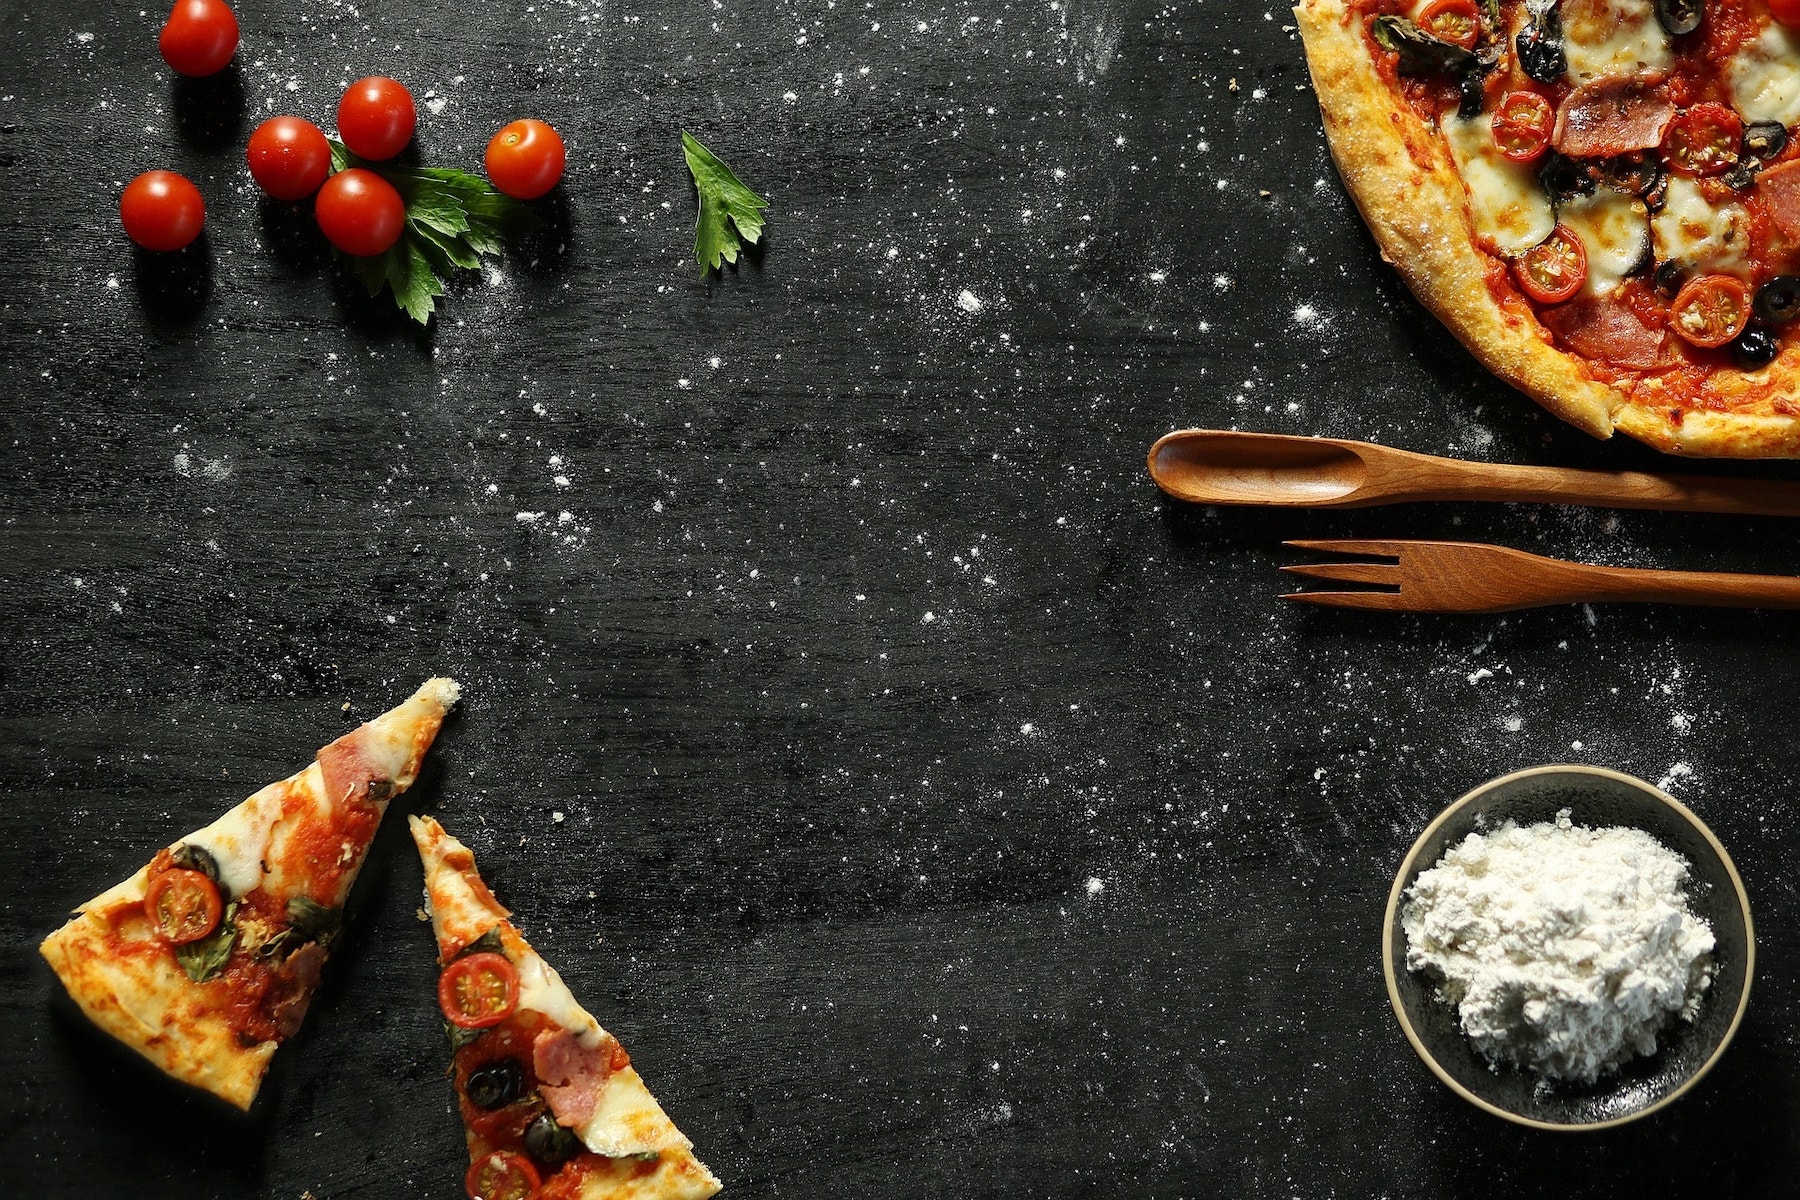 Tackle Today: Stock of the week: PIZZA! (Image by Hoa Luu from Pixabay)